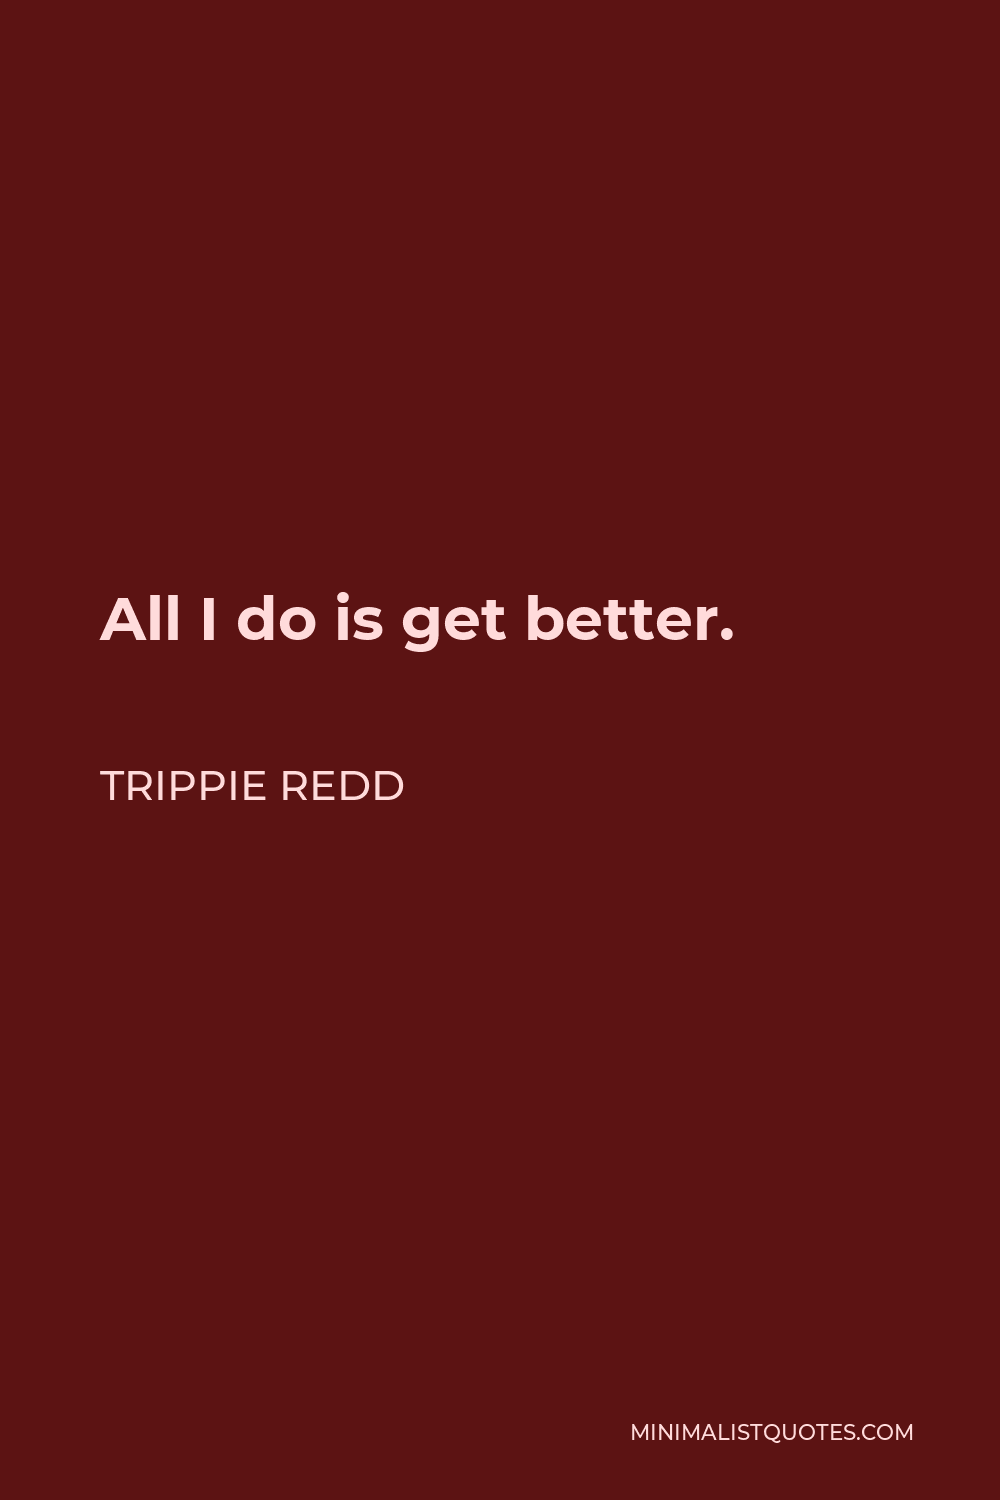 Trippie Redd Quote - All I do is get better.